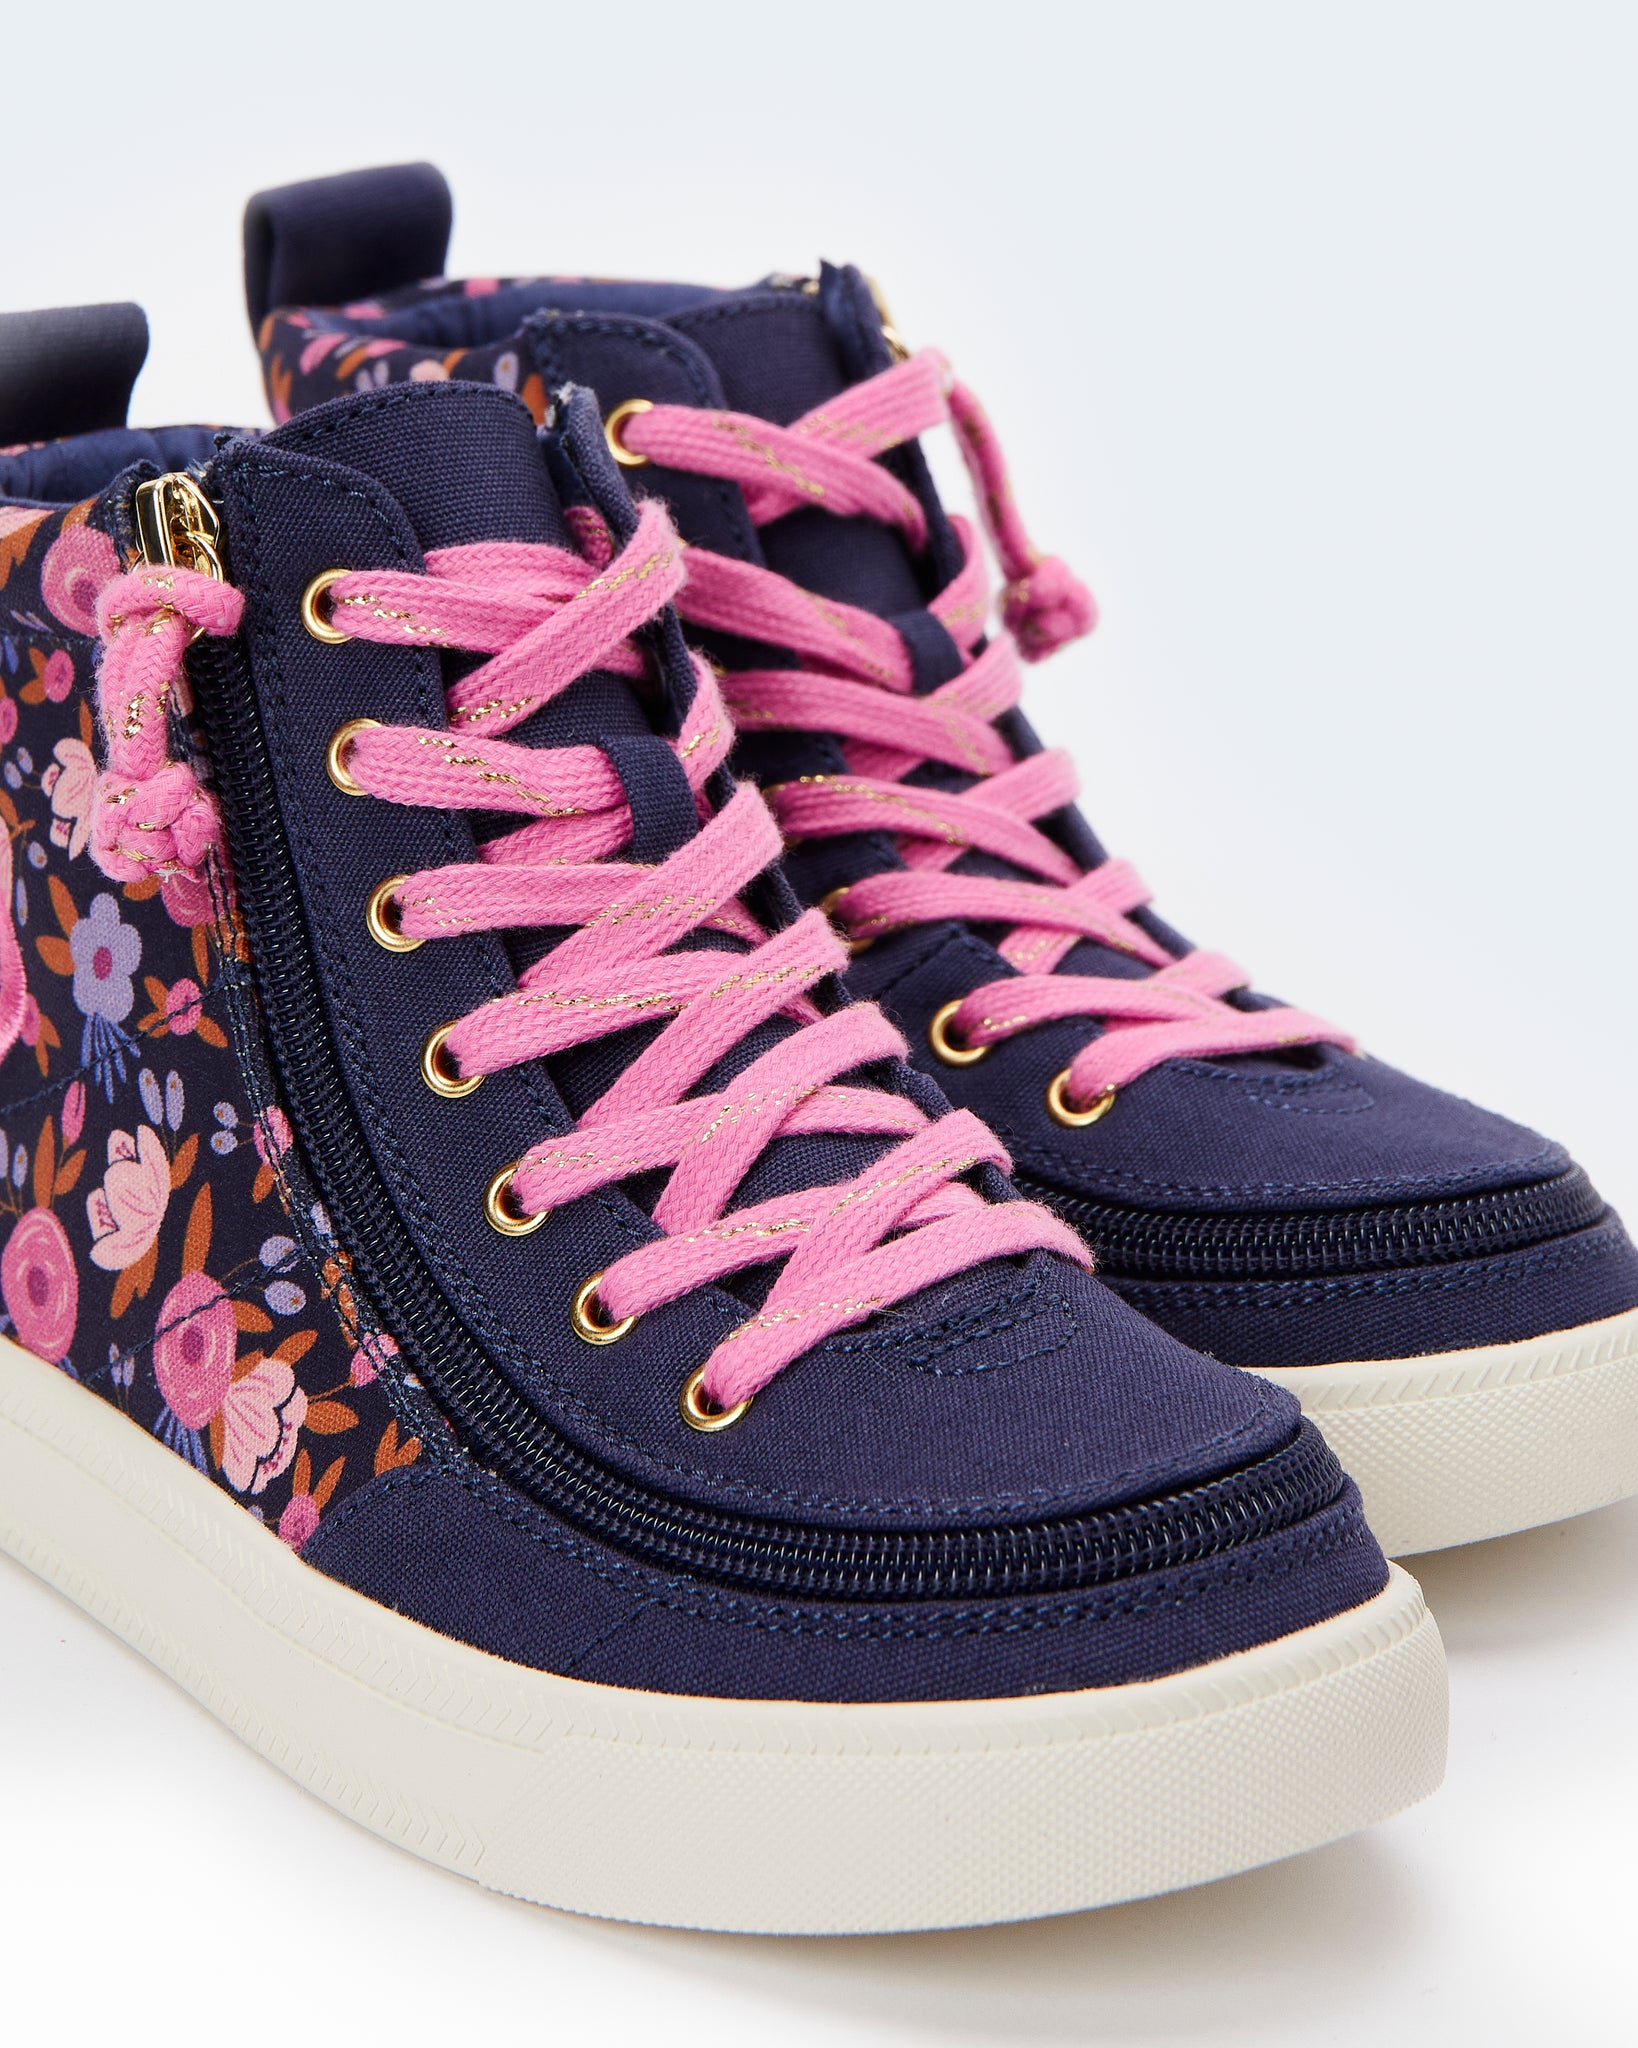 Classic High Top (Kids) - Navy Floral